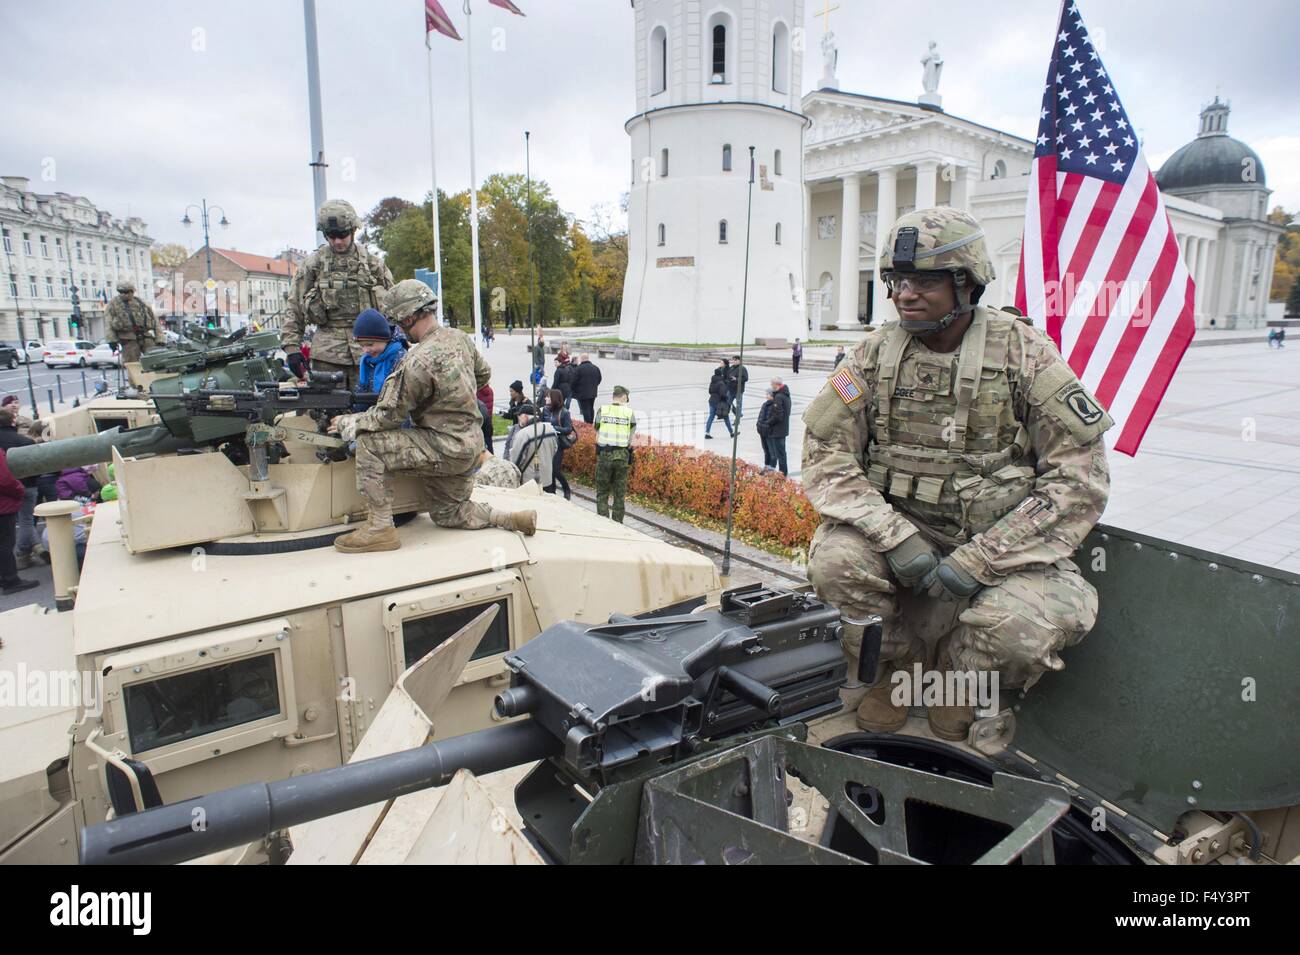 Vilnius, Lithuania. 24th Oct, 2015. U.S. troops from the 173rd Airborne Brigade exhibit their weapons to Lithuanian people in Vilnius, Lithuania, Oct. 24, 2015. U.S. started sending rotational forces to Lithuania since spring of 2014, and jointly attended exercises with troops of Lithuania as well as from other NATO allies. Credit:  Alfredas Pliadis/Xinhua/Alamy Live News Stock Photo